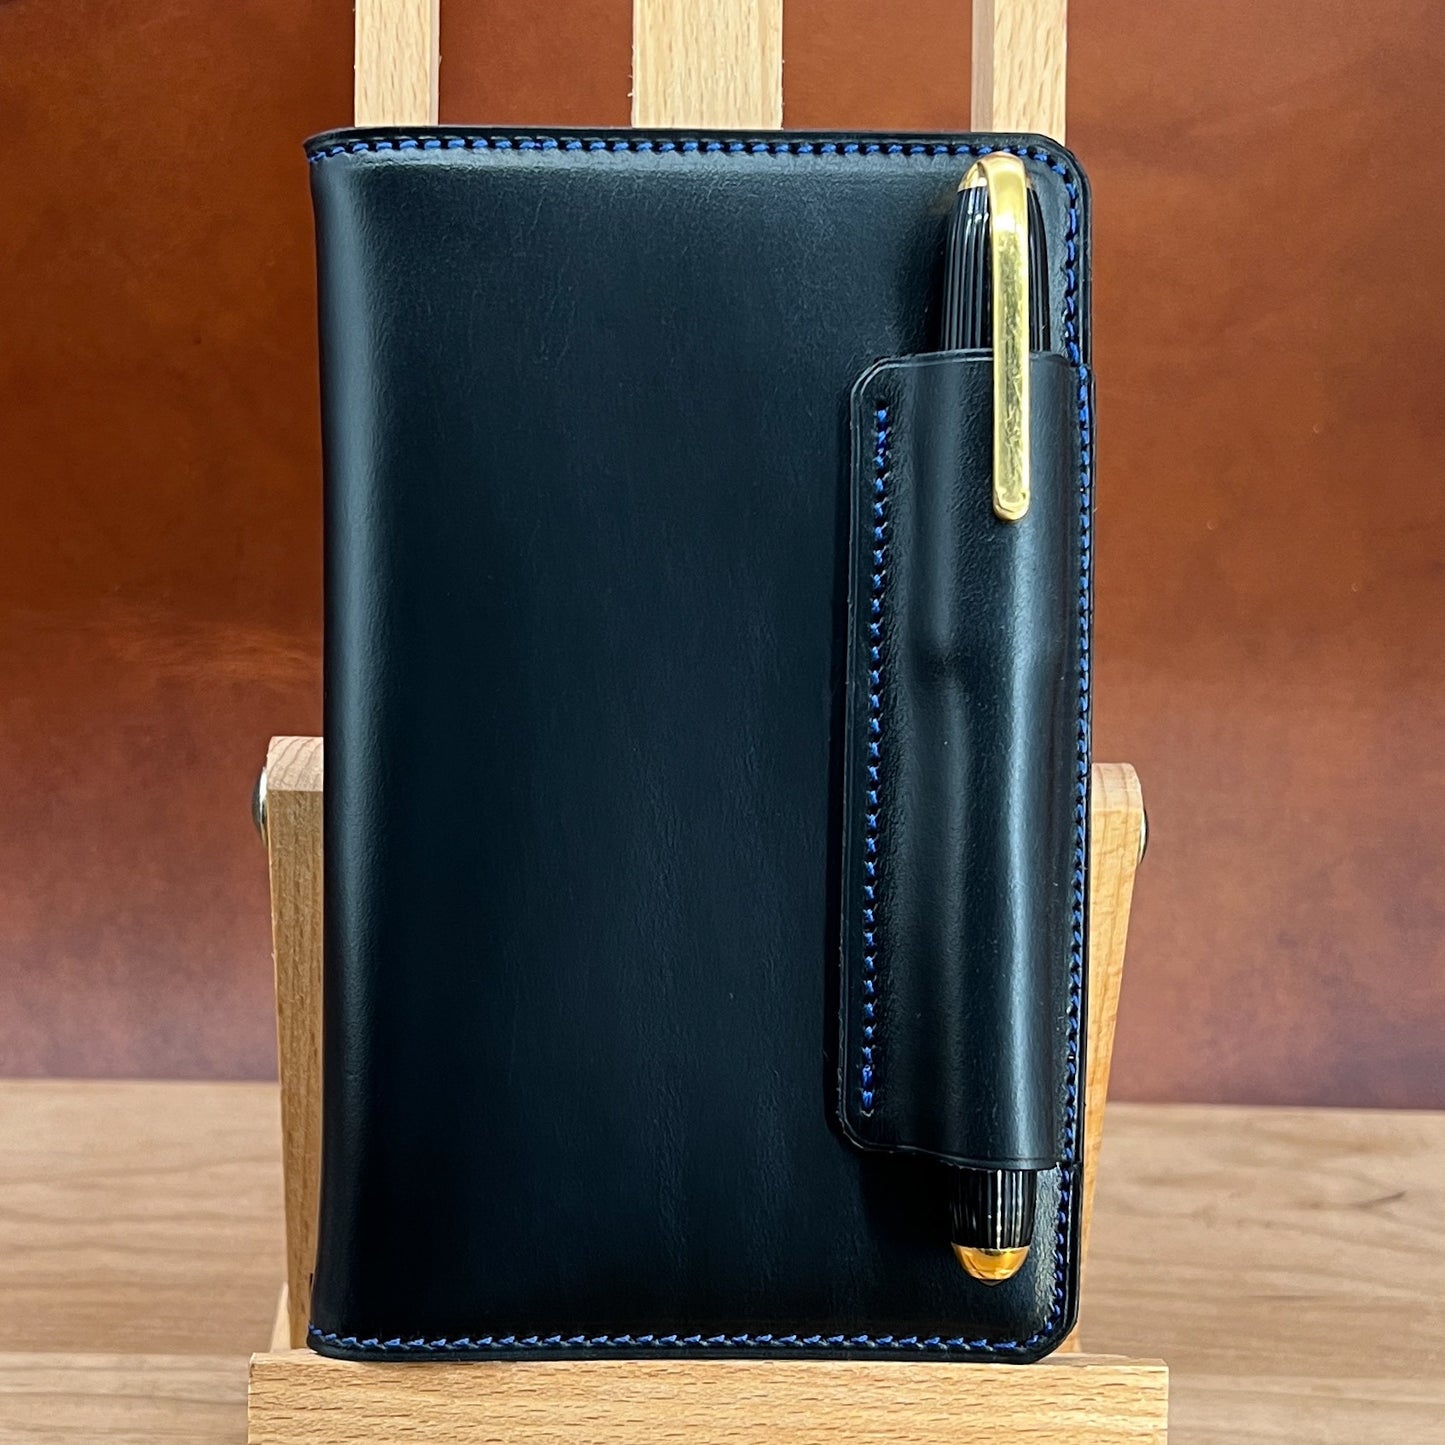 Handmade Leather Notebook cover in Black Horween leather with custom sized Fountain Pen holder.  Handmade by Custom Leather and Pen in Houston Texas.